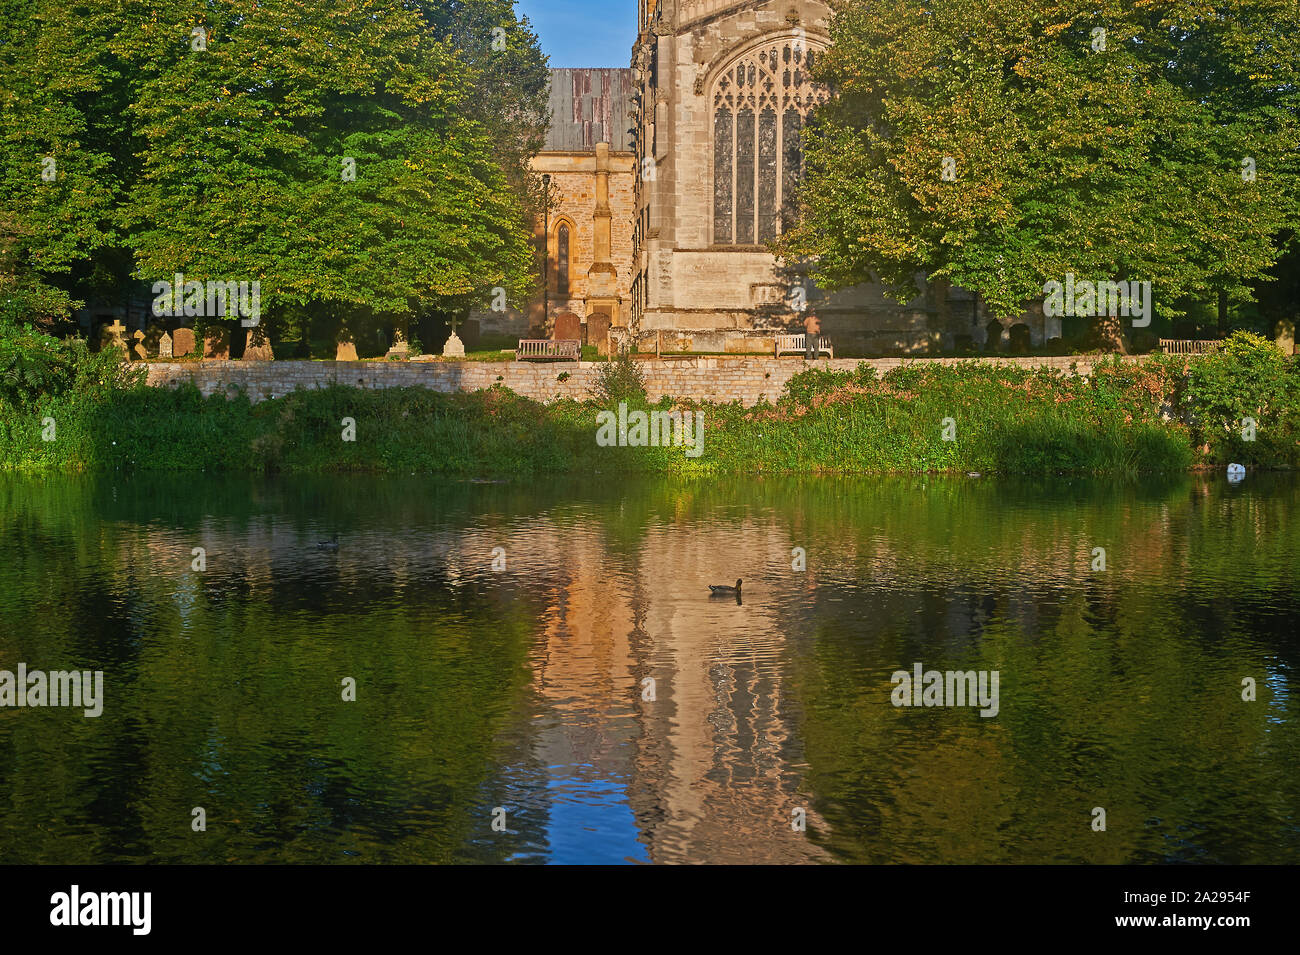 Stratford upon Avon, Warwickshire and Holy Trinity church, burial place of William Shakespeare, stands on the banks of the River Avon. Stock Photo